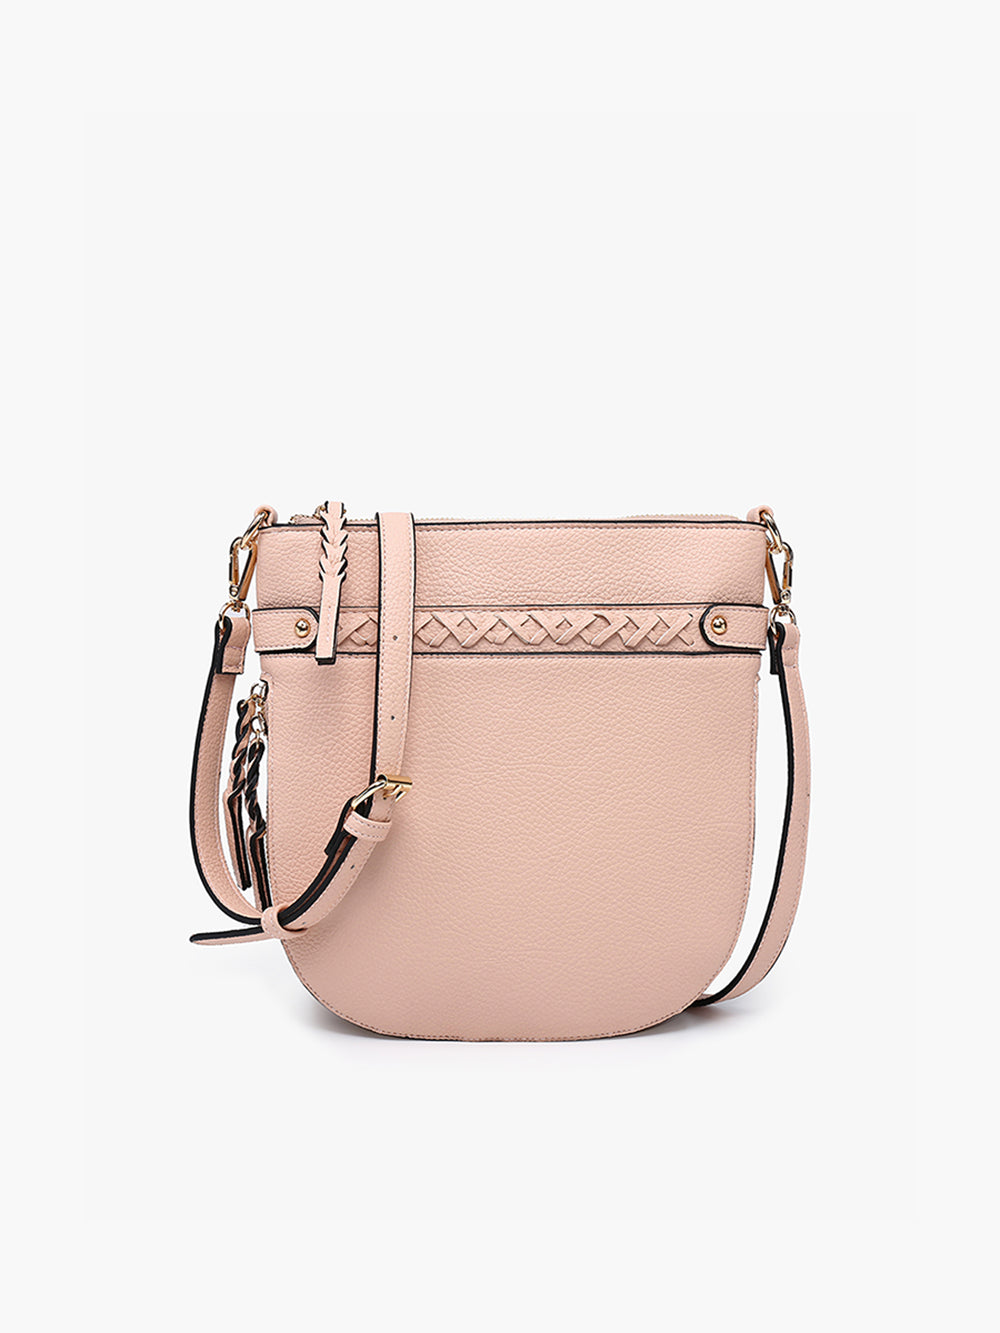 jen & co esther whipstitch round crossbody bag in light pink vegan leather